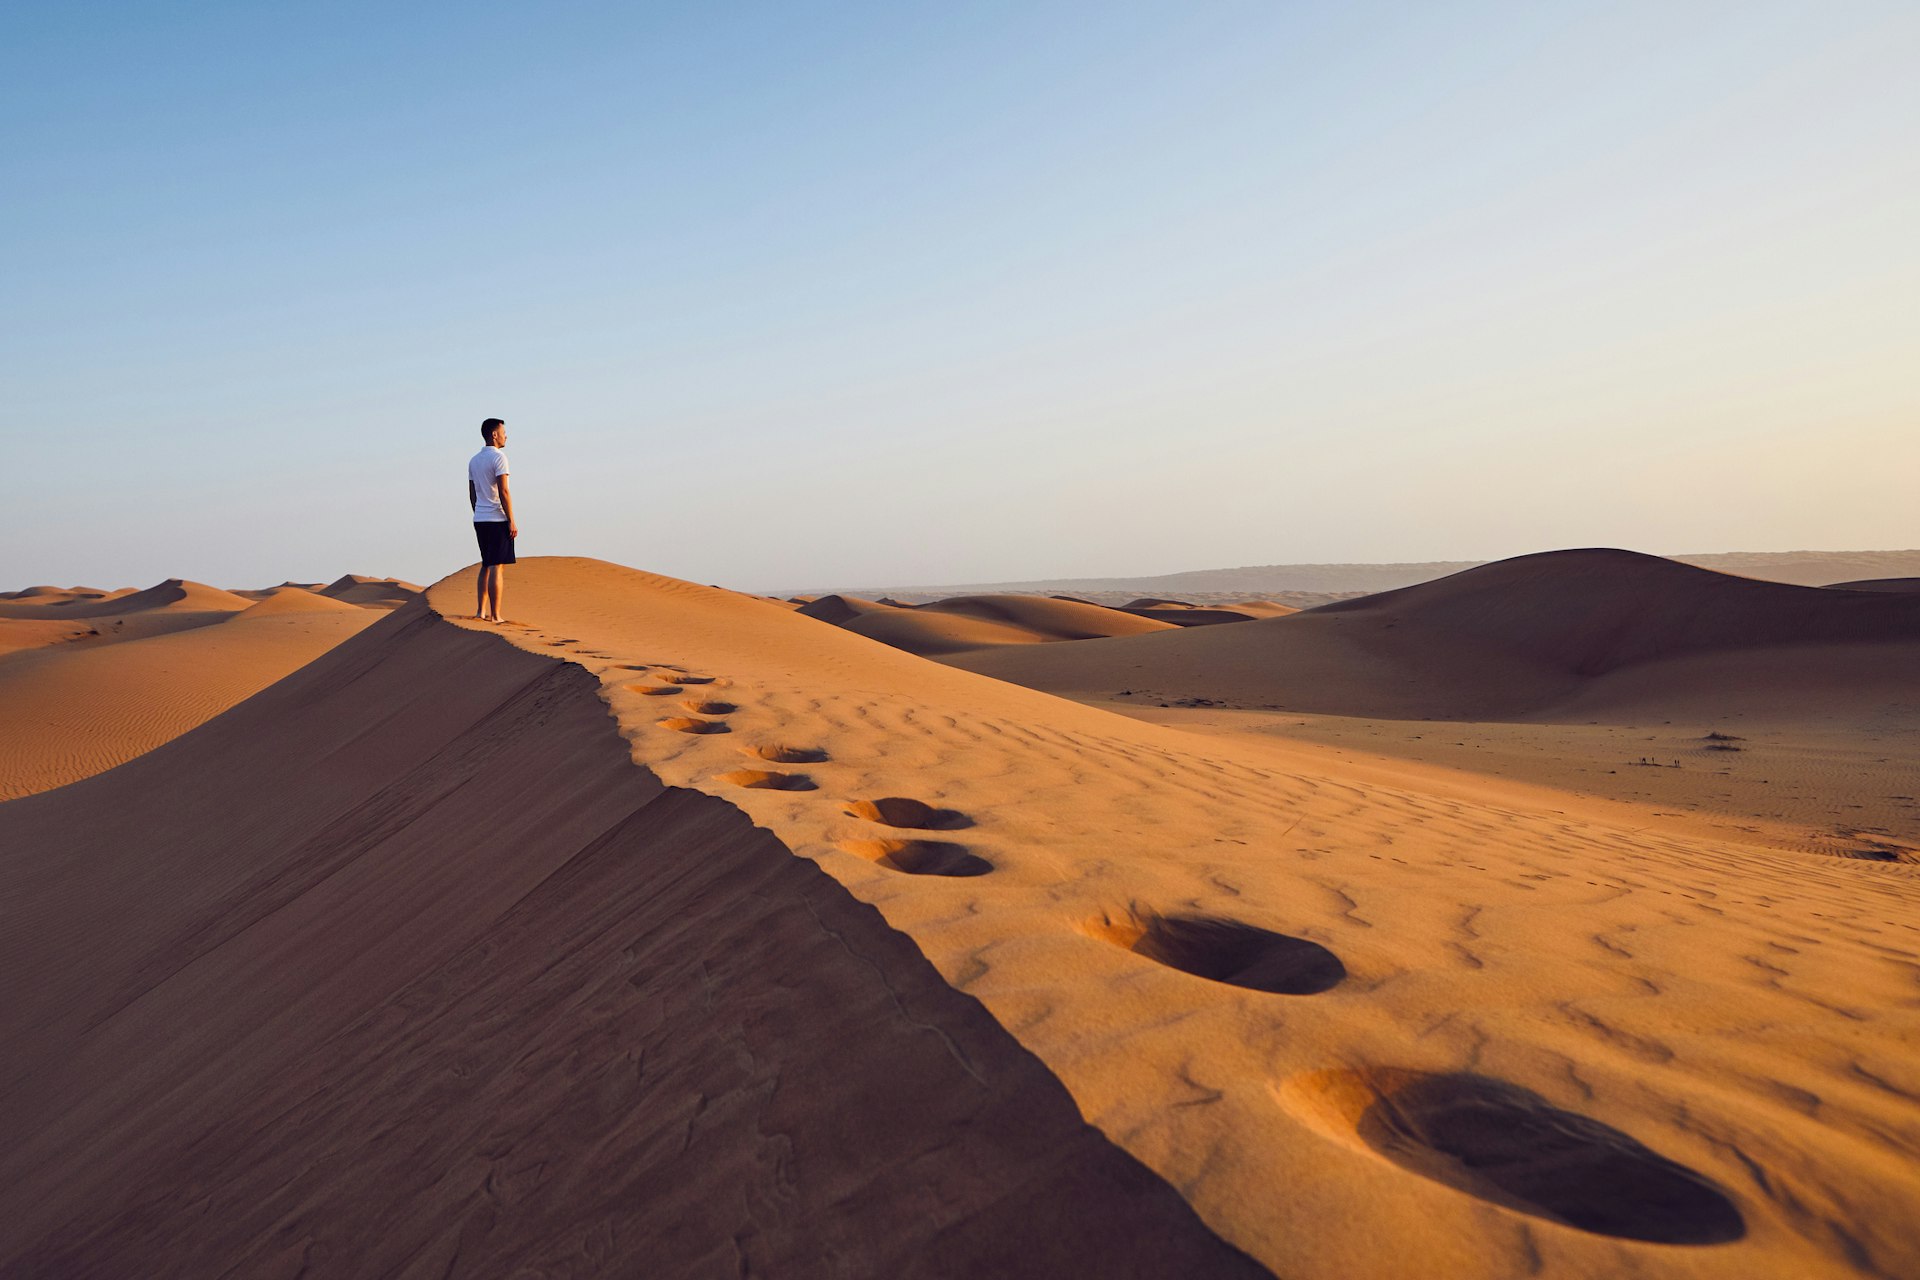 A single figure stands on a sand dune staring off into the desert